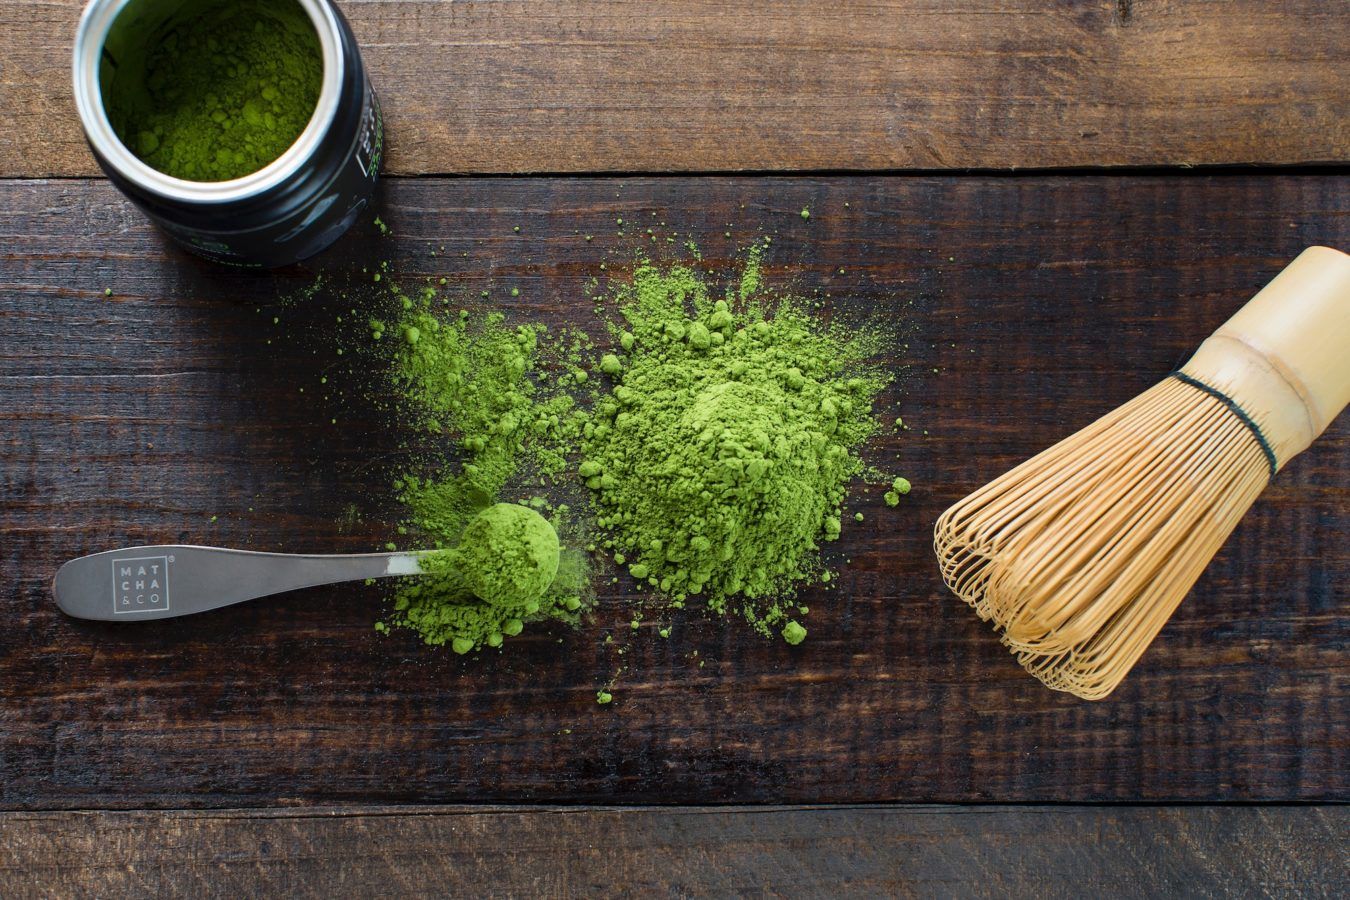 An extensive guide to matcha and its health benefits